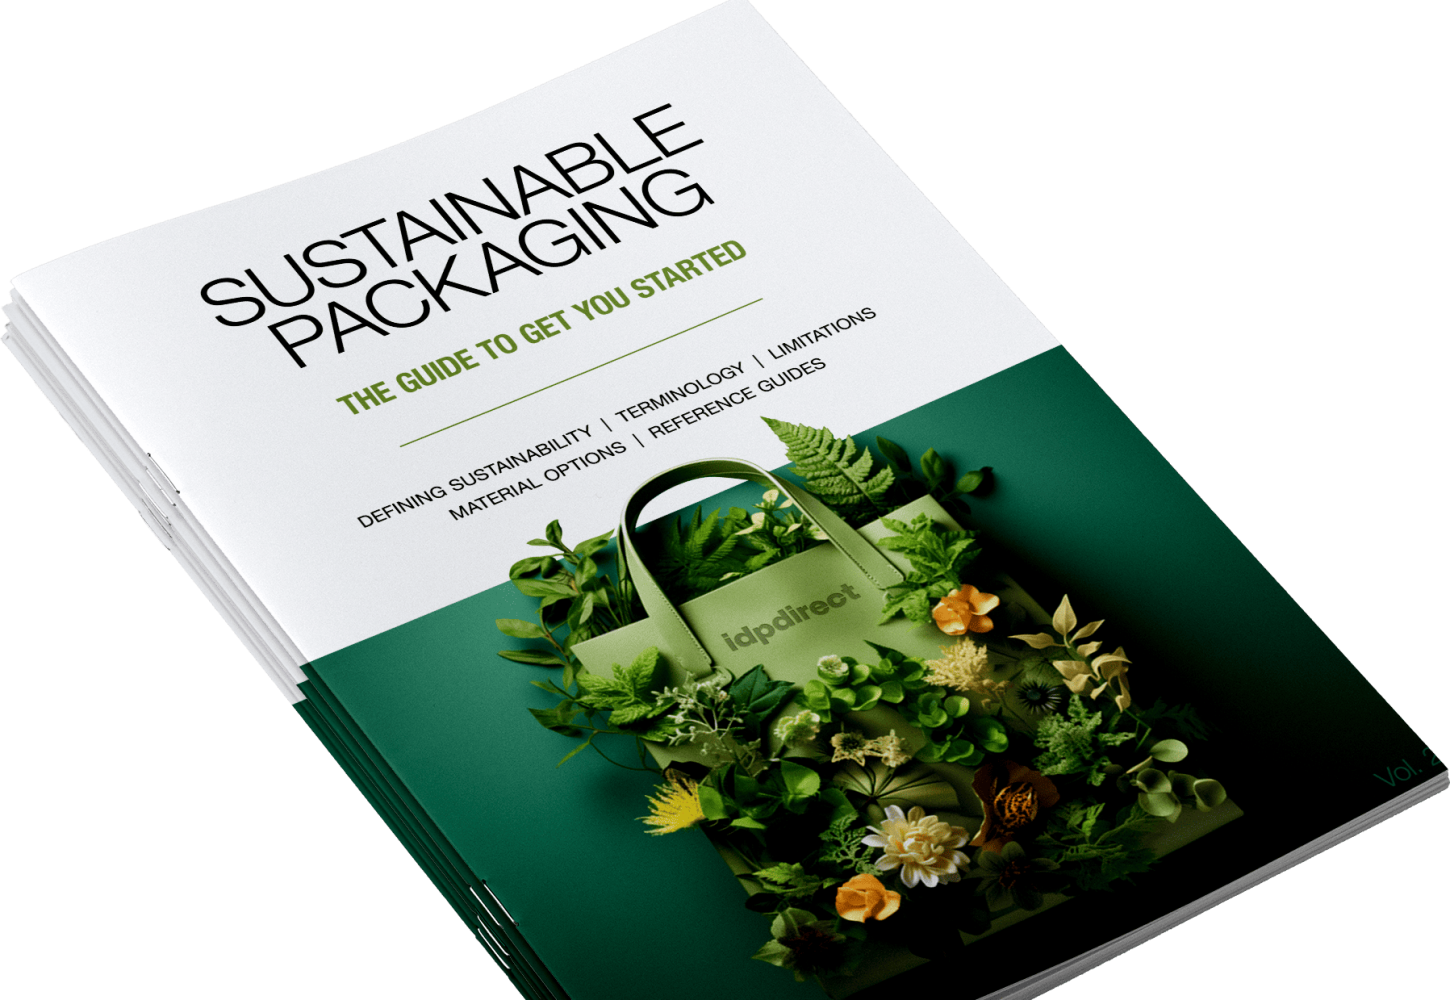 Sustainable_packaging_How_to_booklet